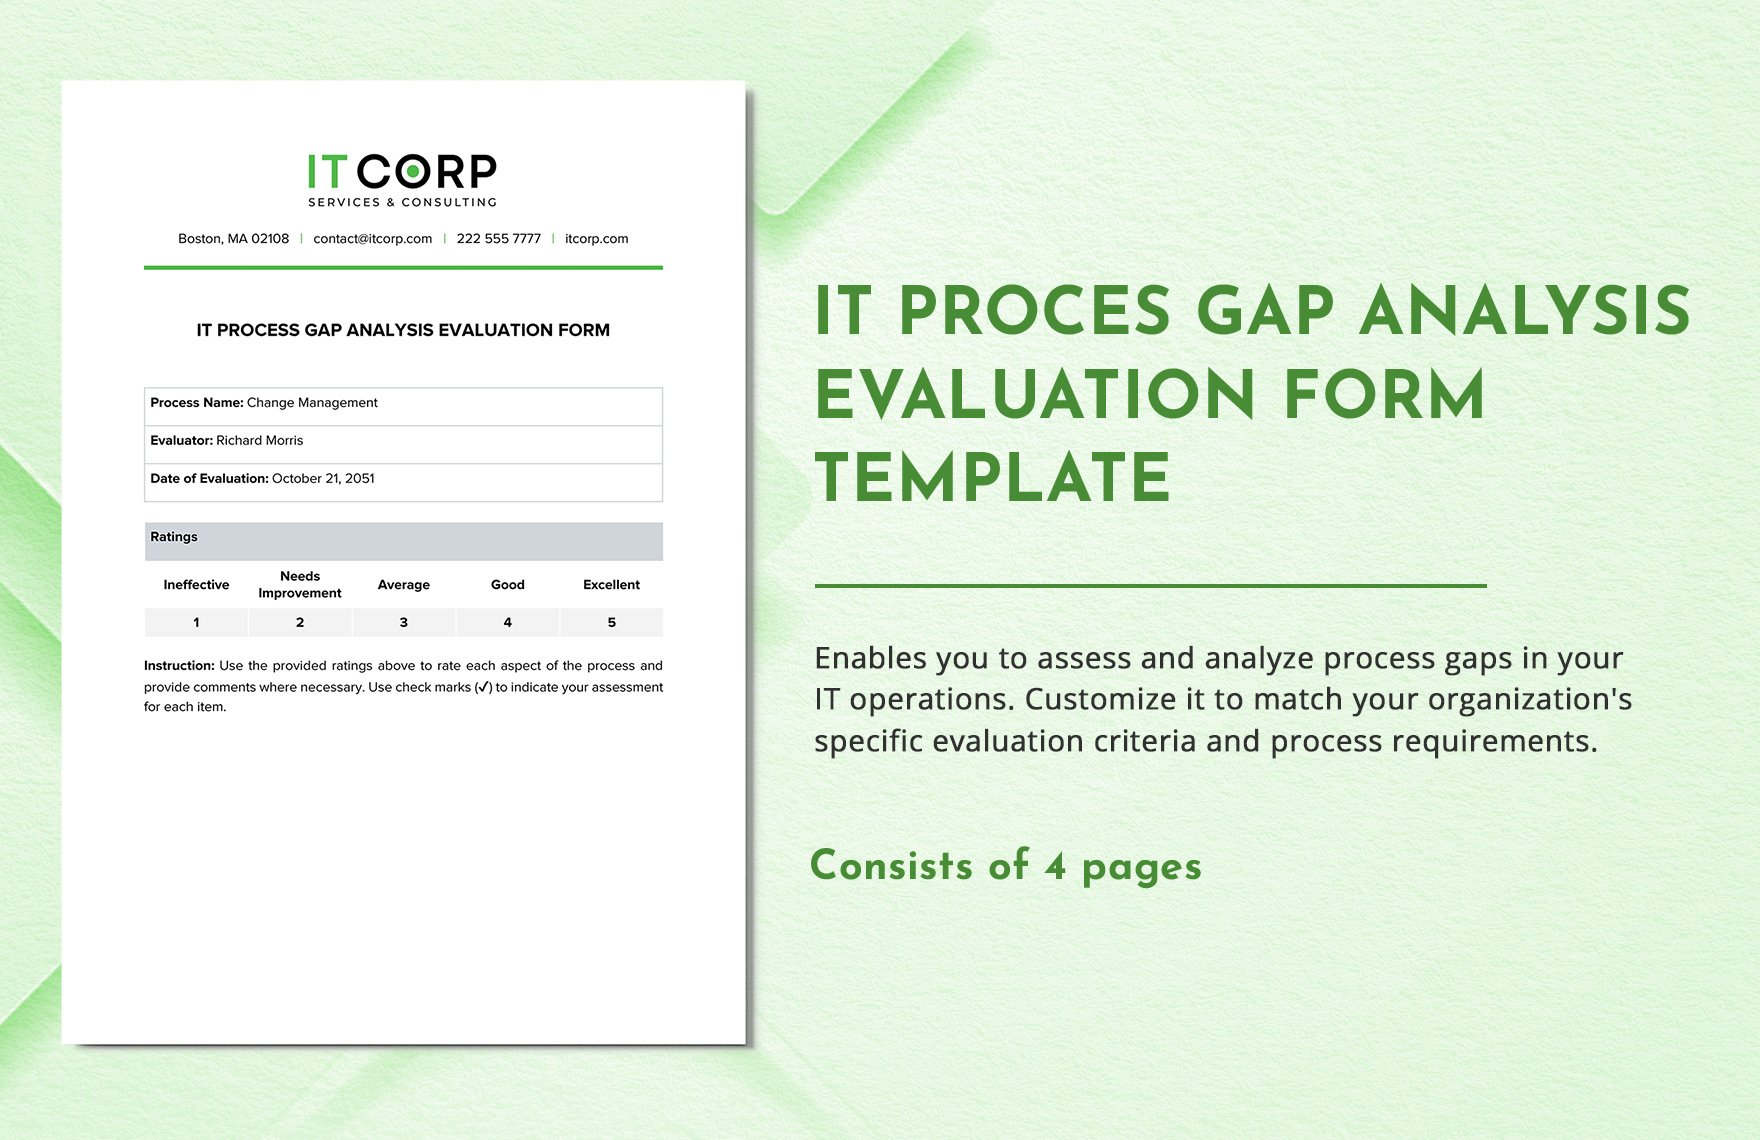 IT Process Gap Analysis Evaluation Form Template